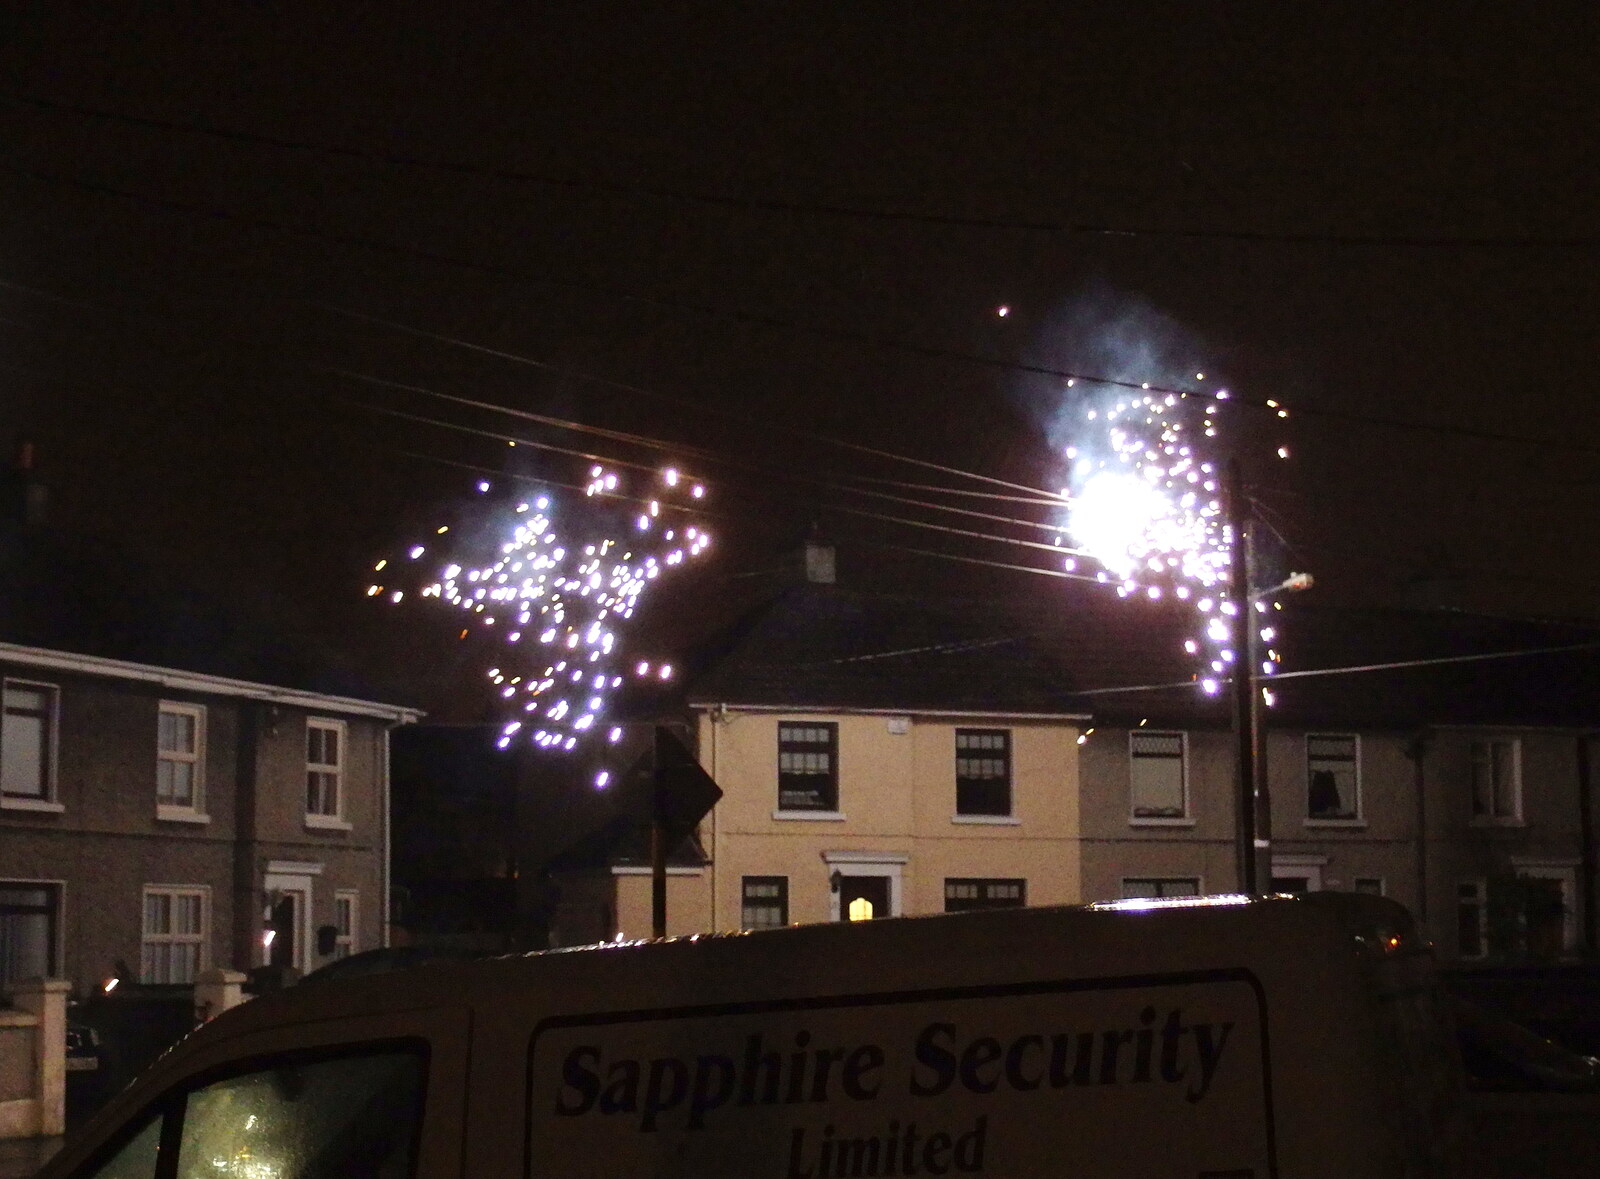 Outside, the overhead power lines explode from Dun Laoghaire and an Electrical Disaster, Monkstown, County Dublin, Ireland - 4th January 2014